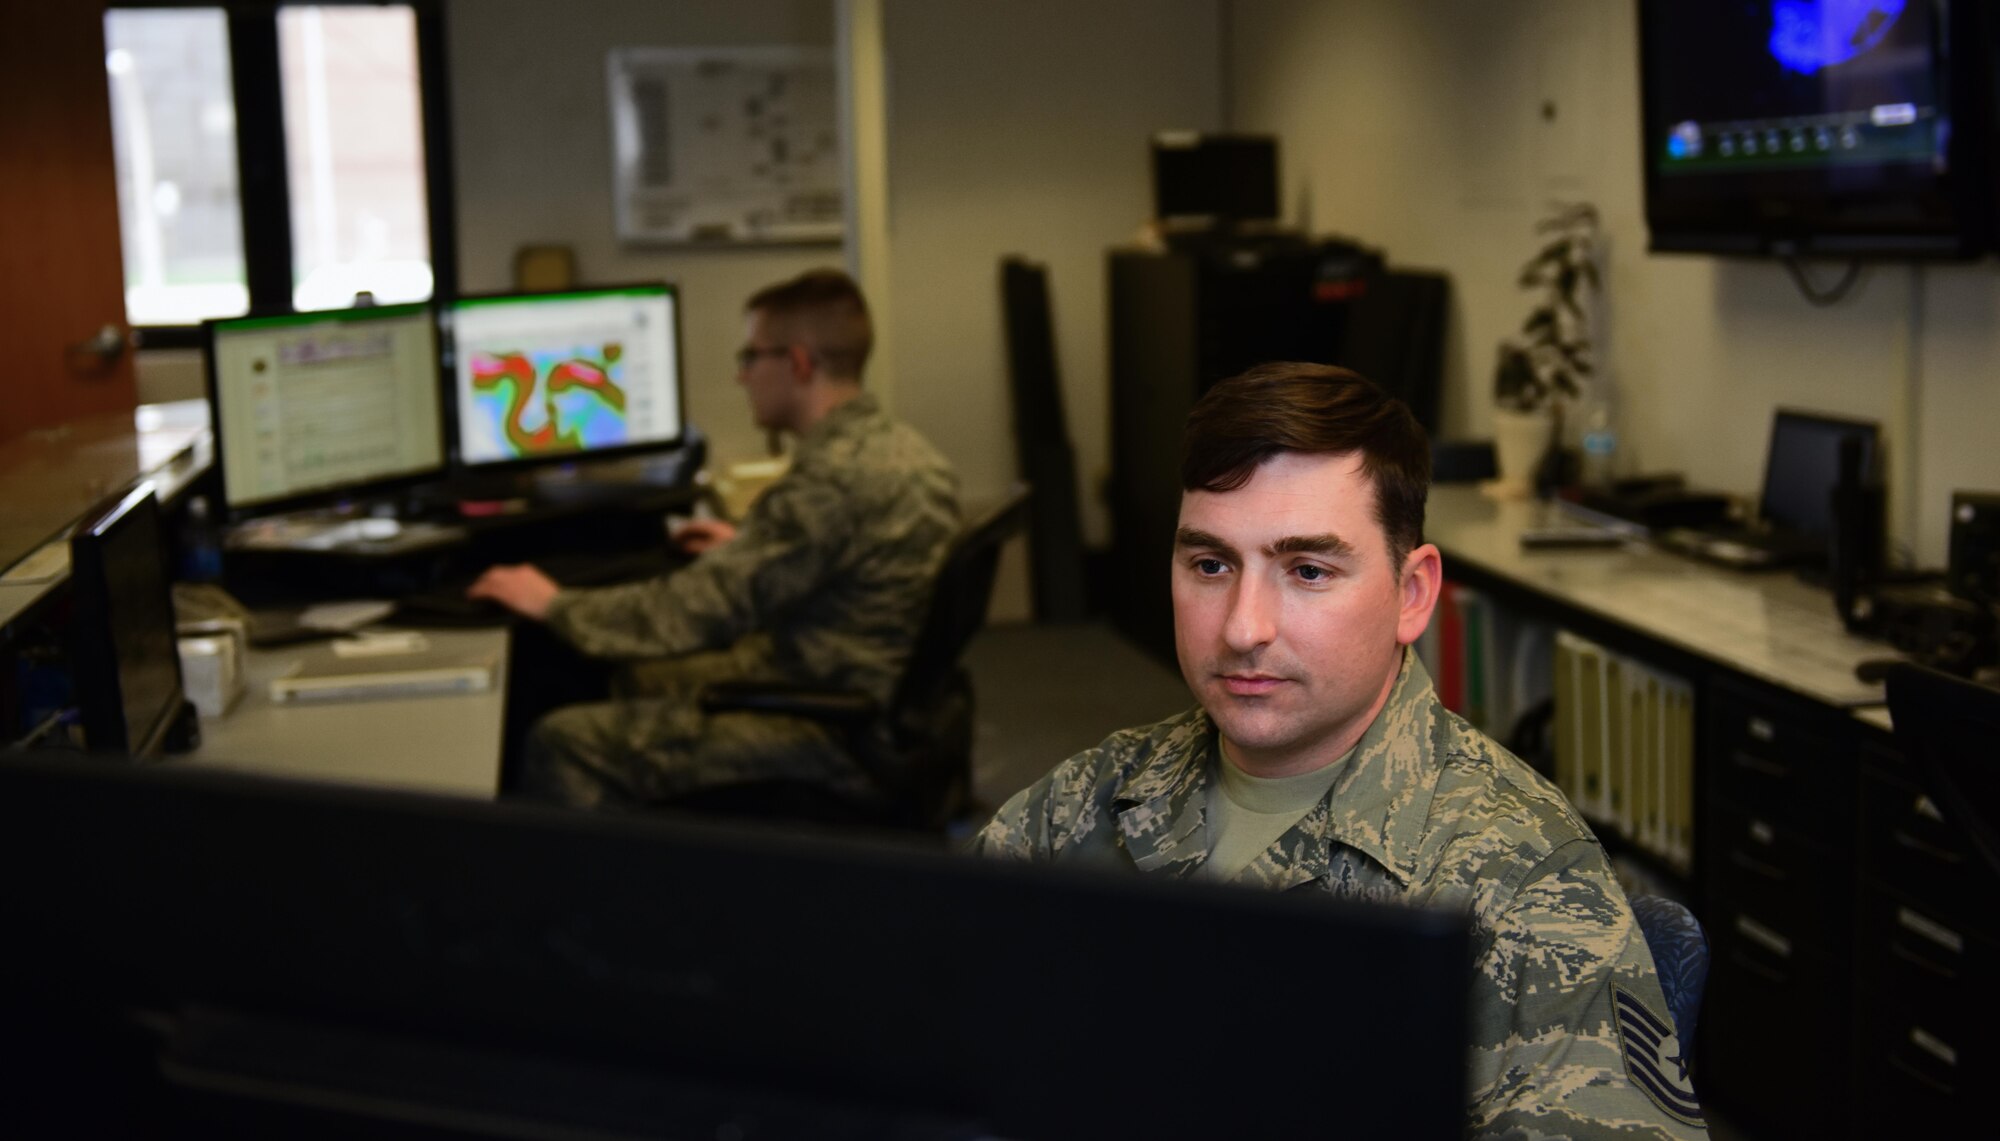 U.S. Air Force Tech. Sgt. Jon Stimmel Jr., right, the 509th Operations Support Squadron (OSS) NCO in charge of mission weather operations, develops a flying brief while Senior Airman Alex Knowles, left, a weather forecaster assigned to the 509th OSS, reviews the base forecast at Whiteman Air Force Base, Mo., March 28, 2017. The shop is divided into the mission operations and airfield operations sections, as well as a training. (U.S. Air Force photo by Airman 1st Class Jazmin Smith)